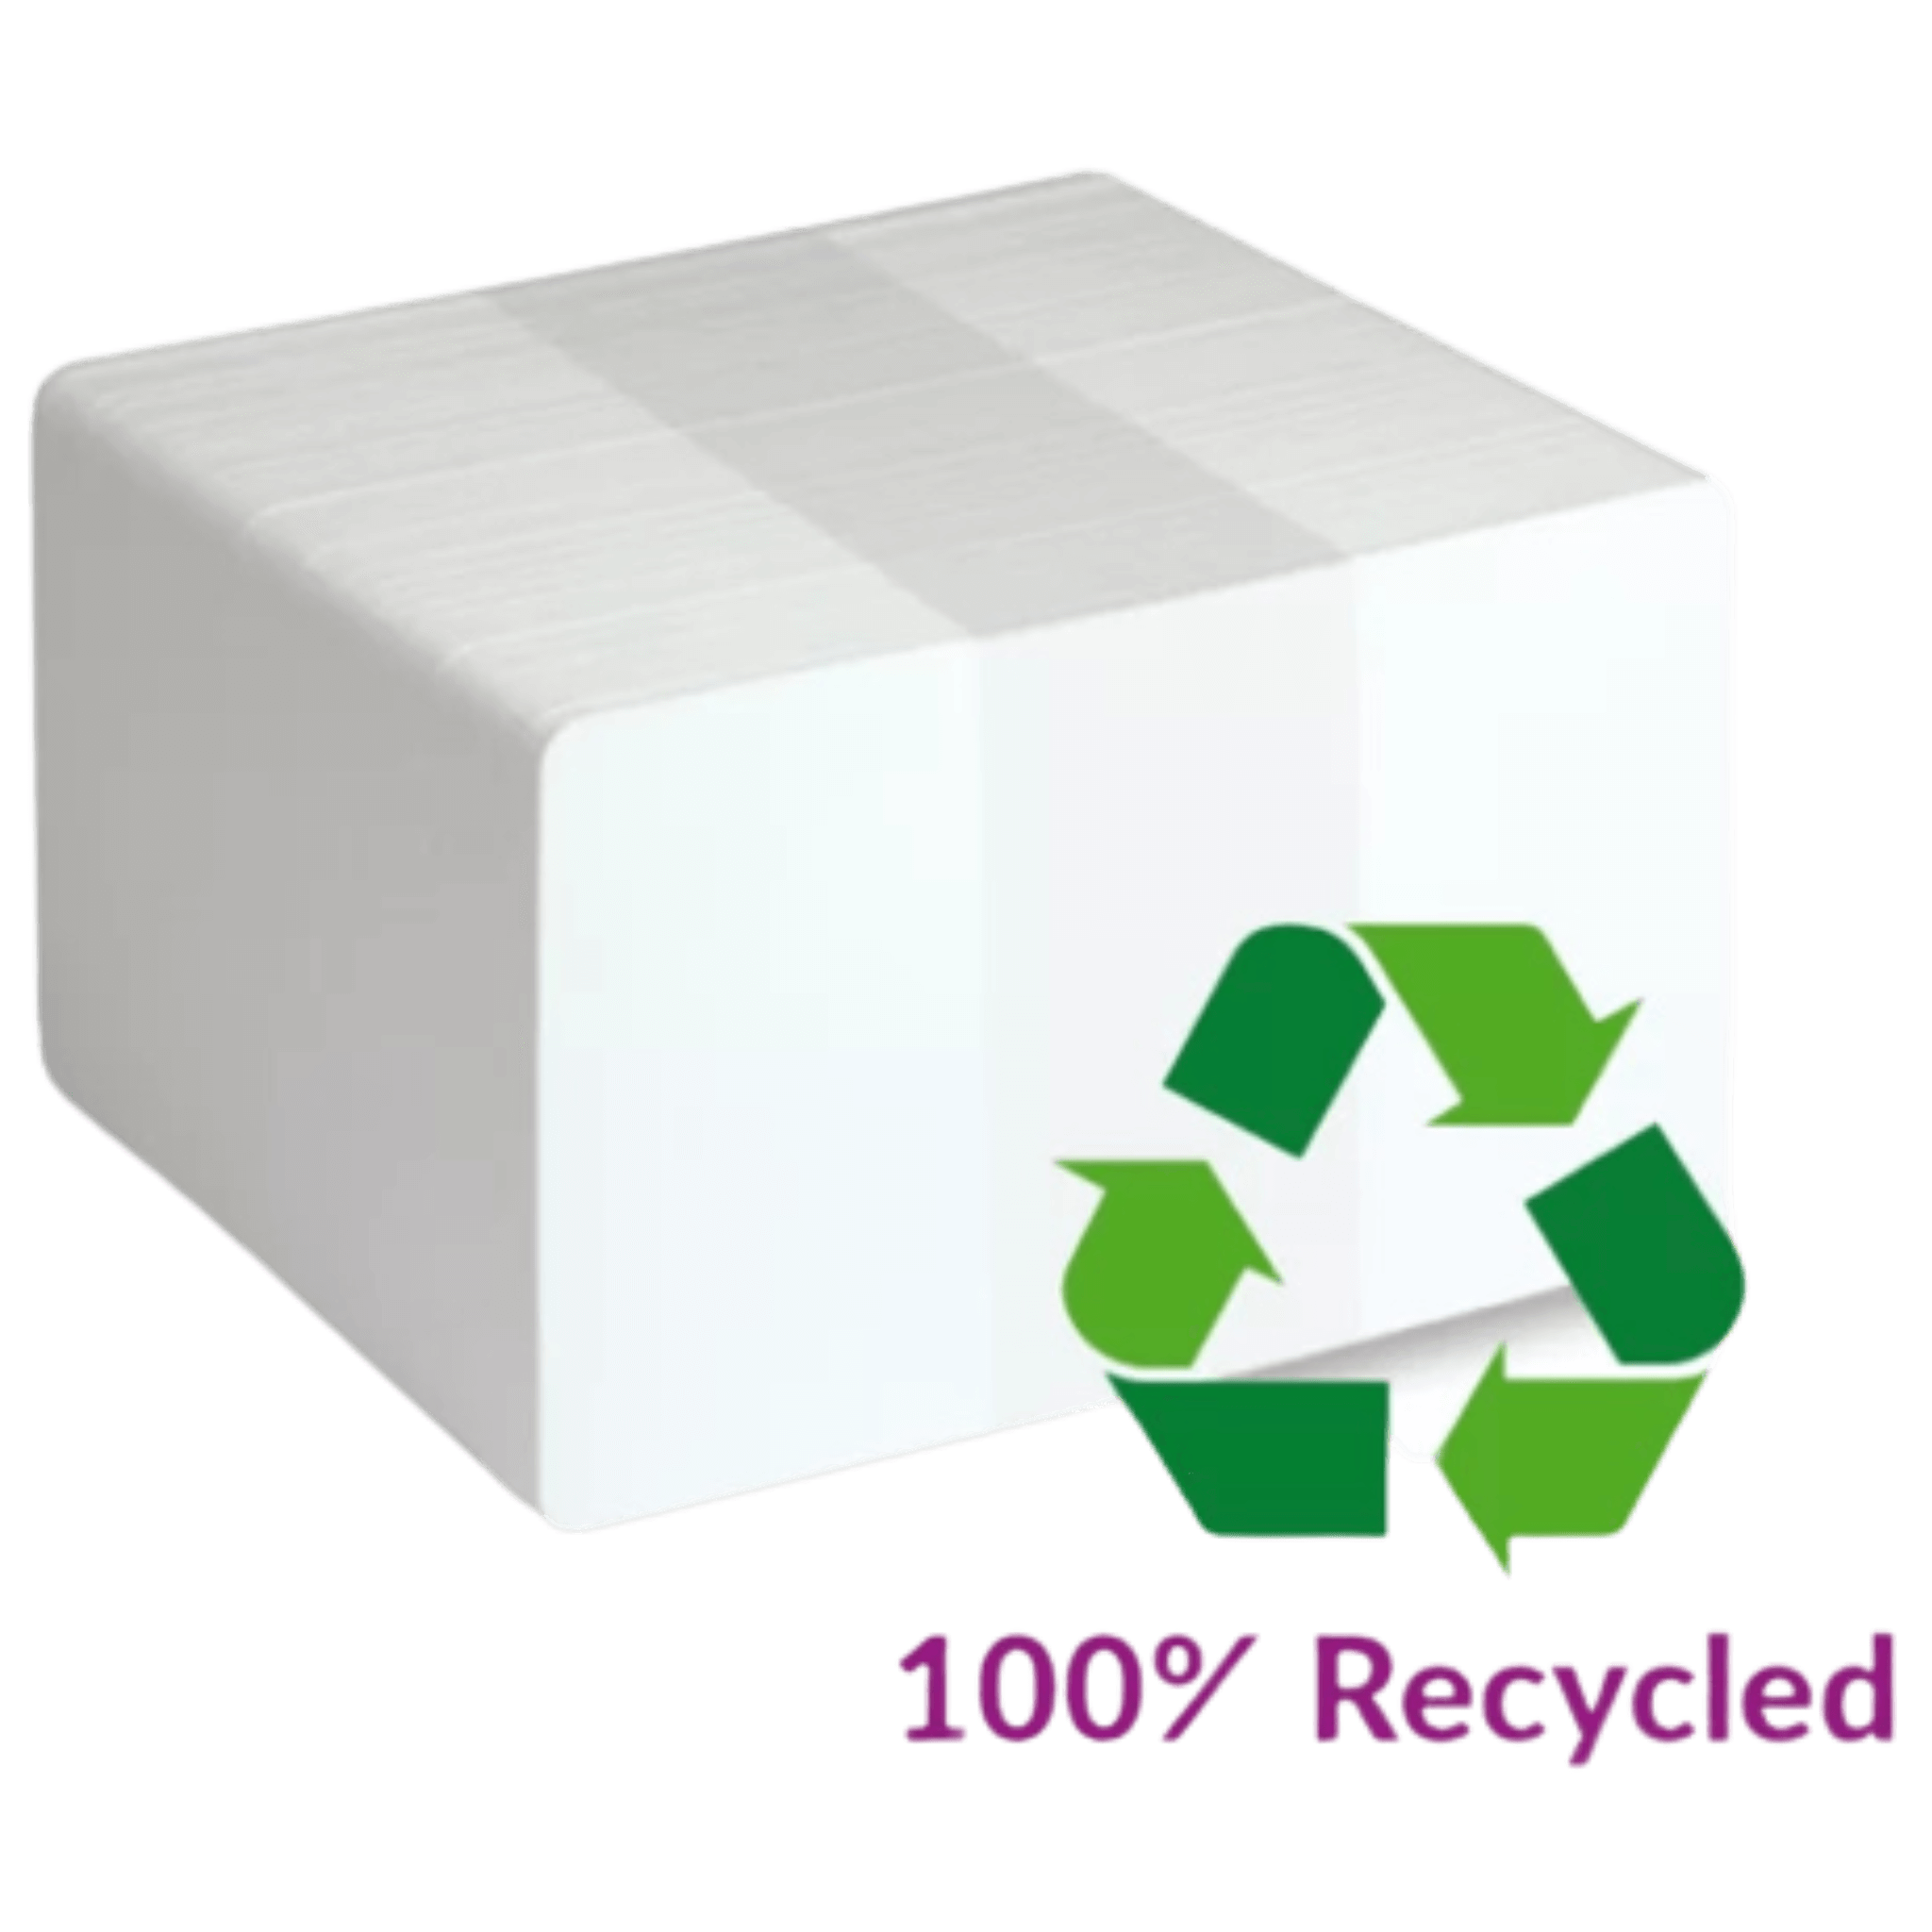 Blank Plastic Cards, 100% Recycled PVC, 100 Pack